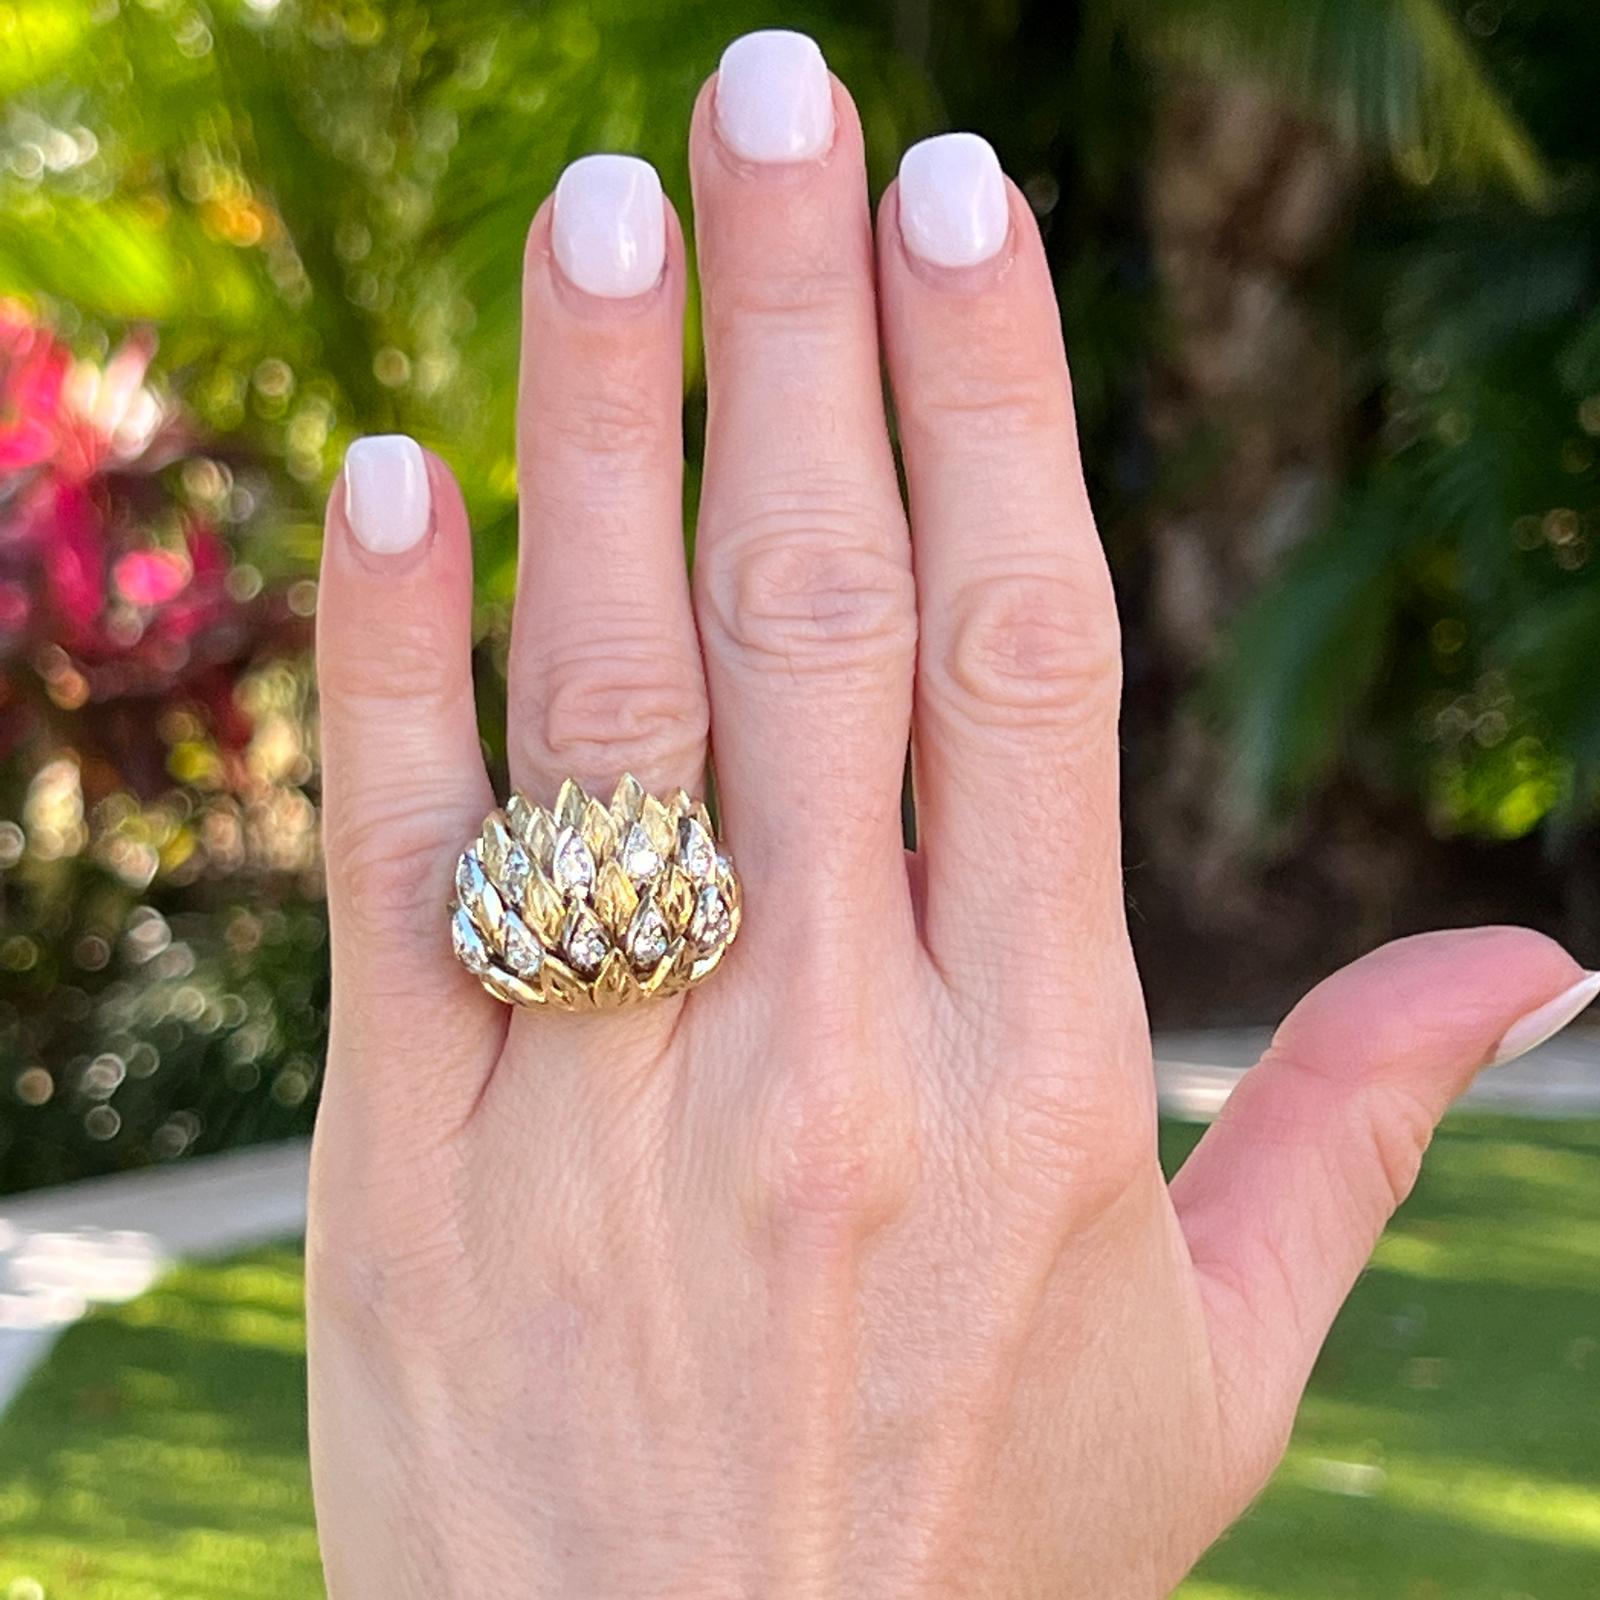 Diamond textured dome ring circa 1960's fashioned in 18 karat white and yellow gold. The textured gold features 12 round brilliant cut diamonds weighing approximately 1.20 carat total weight and graded G-H color and SI clarity. The ring measures 20